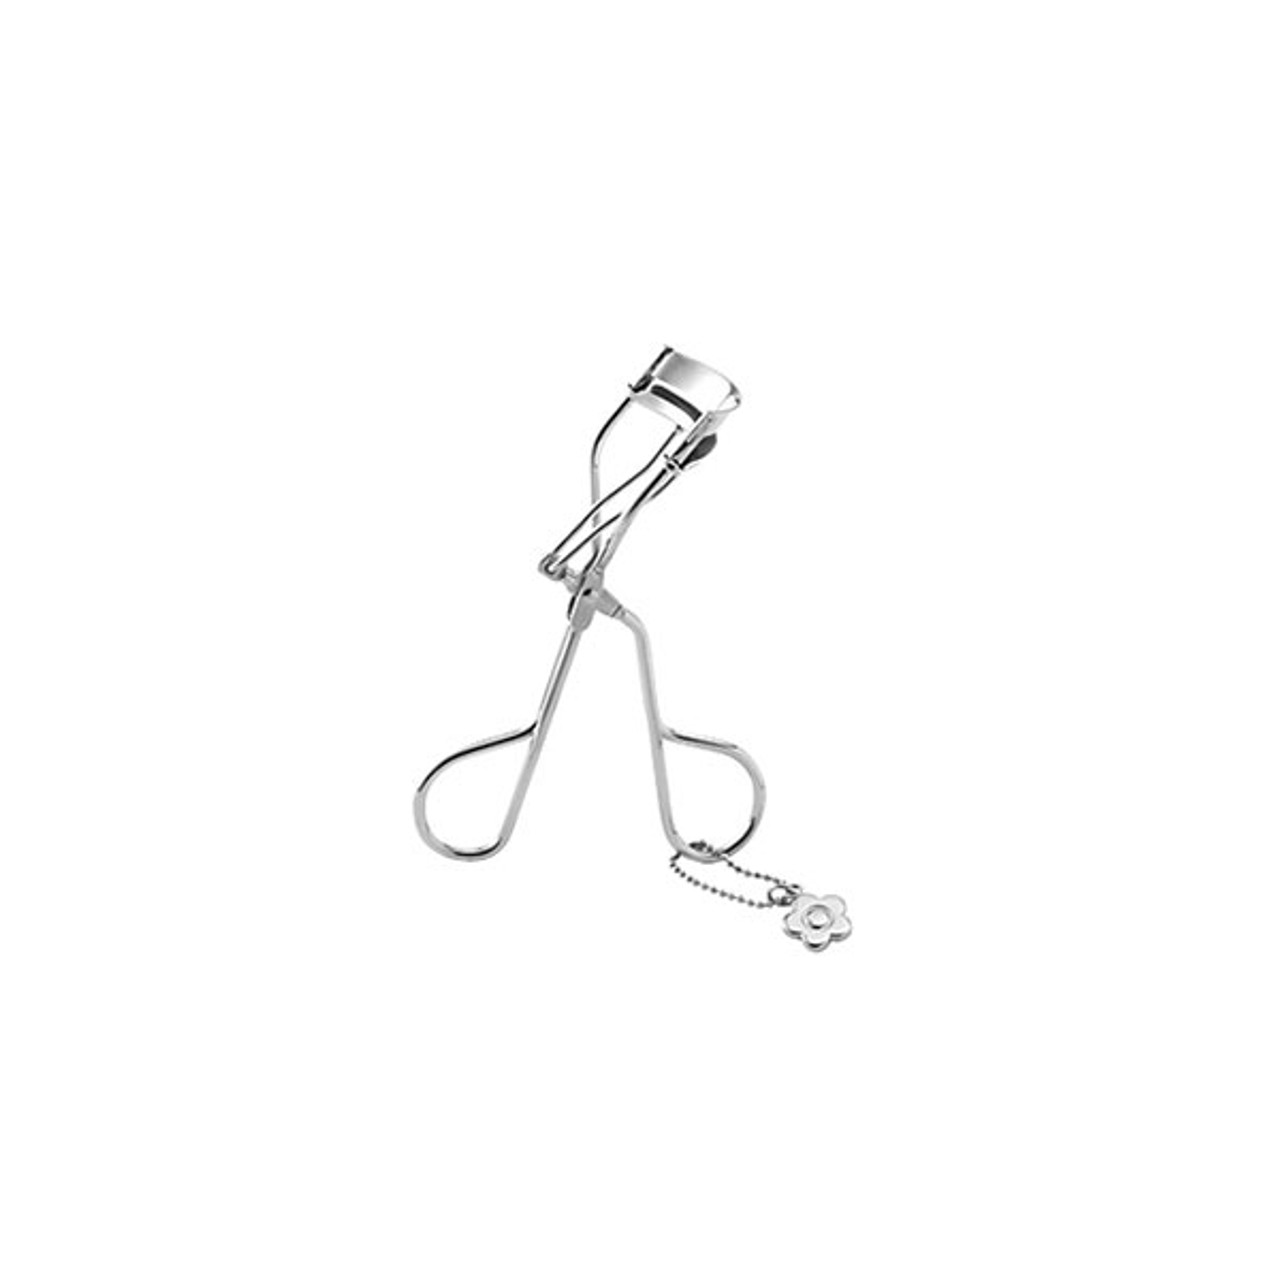 A silver eyelash curler. There is a silver Mary Quant Daisy charm attached.